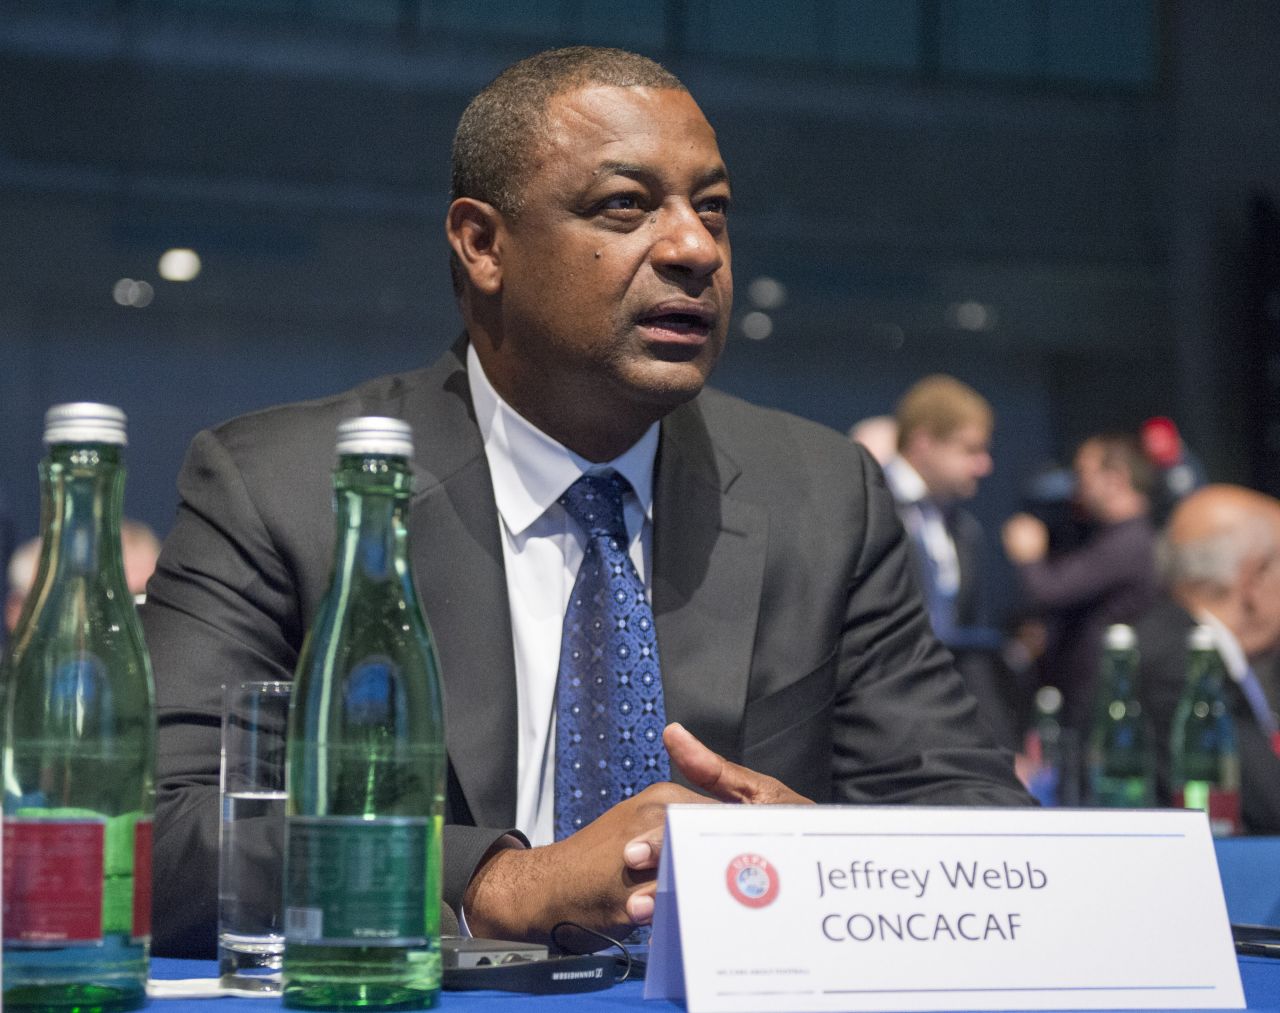 The 50-year-old Jeffrey Webb is a FIFA vice president and executive committee member, CONCACAF -- the North American regional body for the world governing body  -- president, Caribbean Football Union (CFU) executive committee member and Cayman Islands Football Association (CIFA) president.